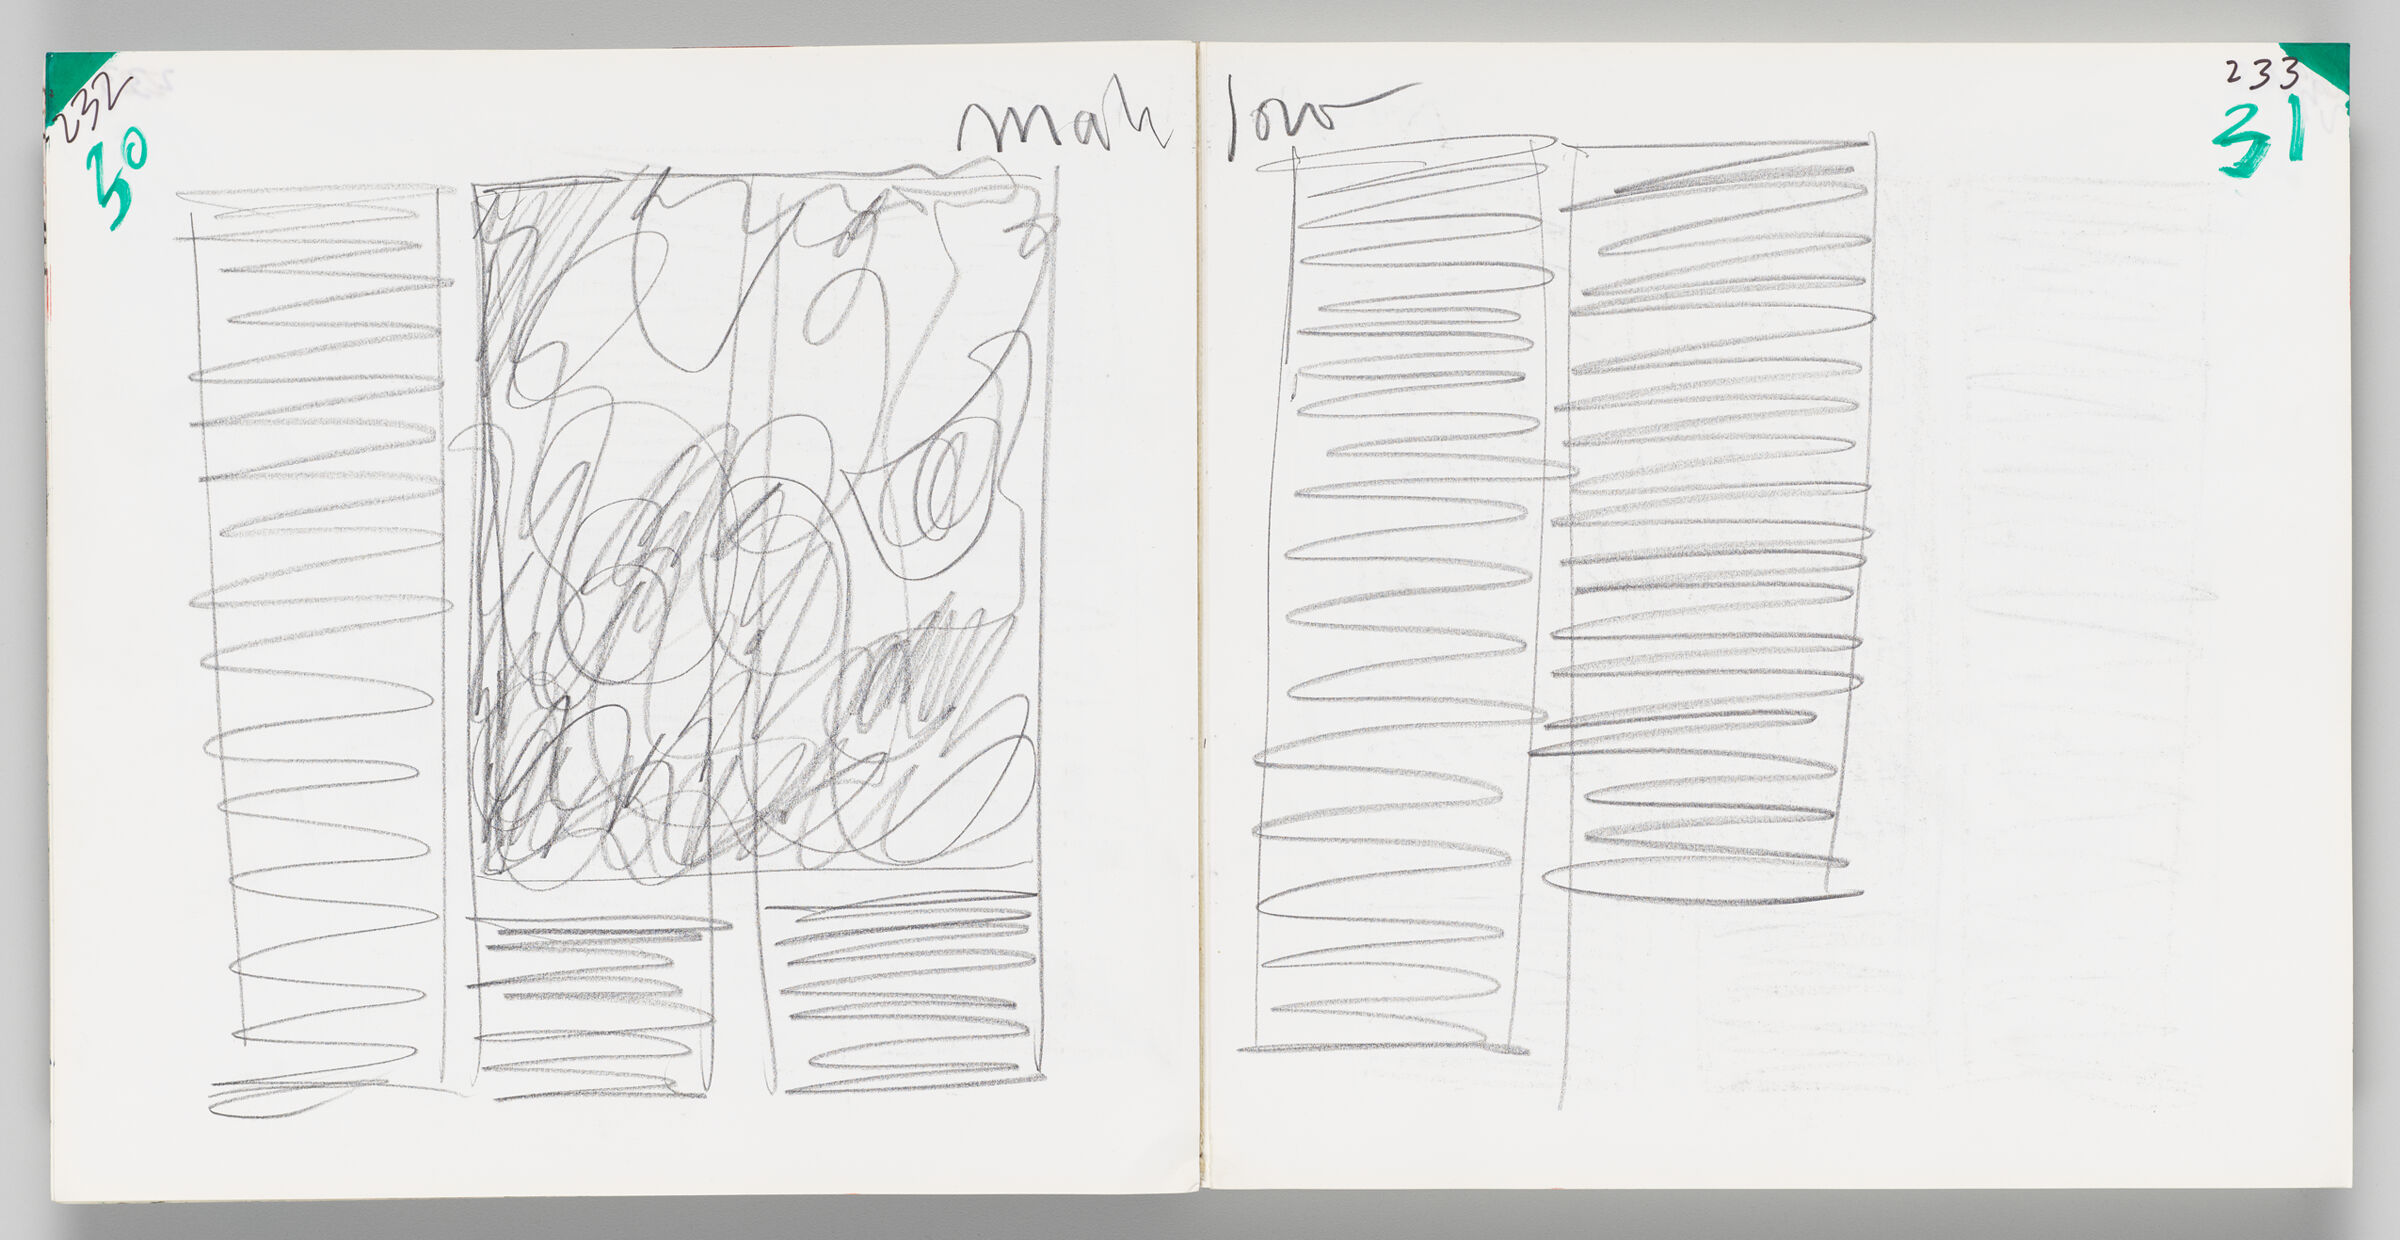 Untitled (Page Layout Design, Left Page); Untitled (Page Layout Design, Right Page)